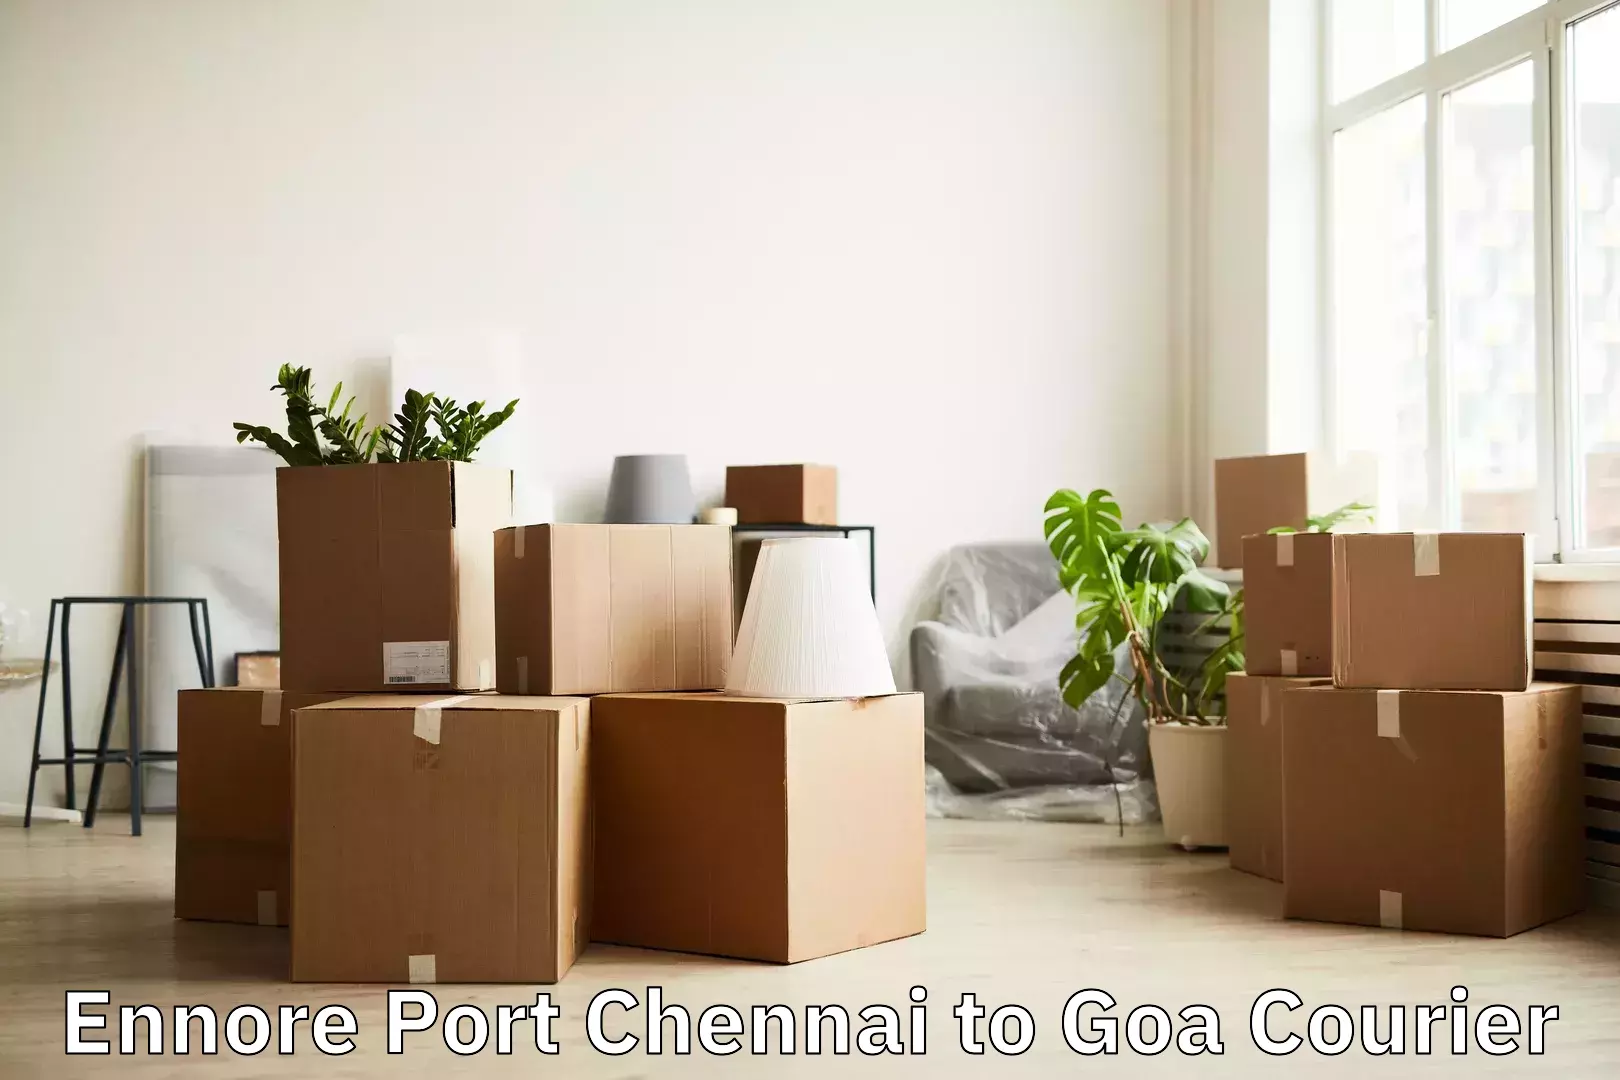 Luggage delivery network Ennore Port Chennai to South Goa